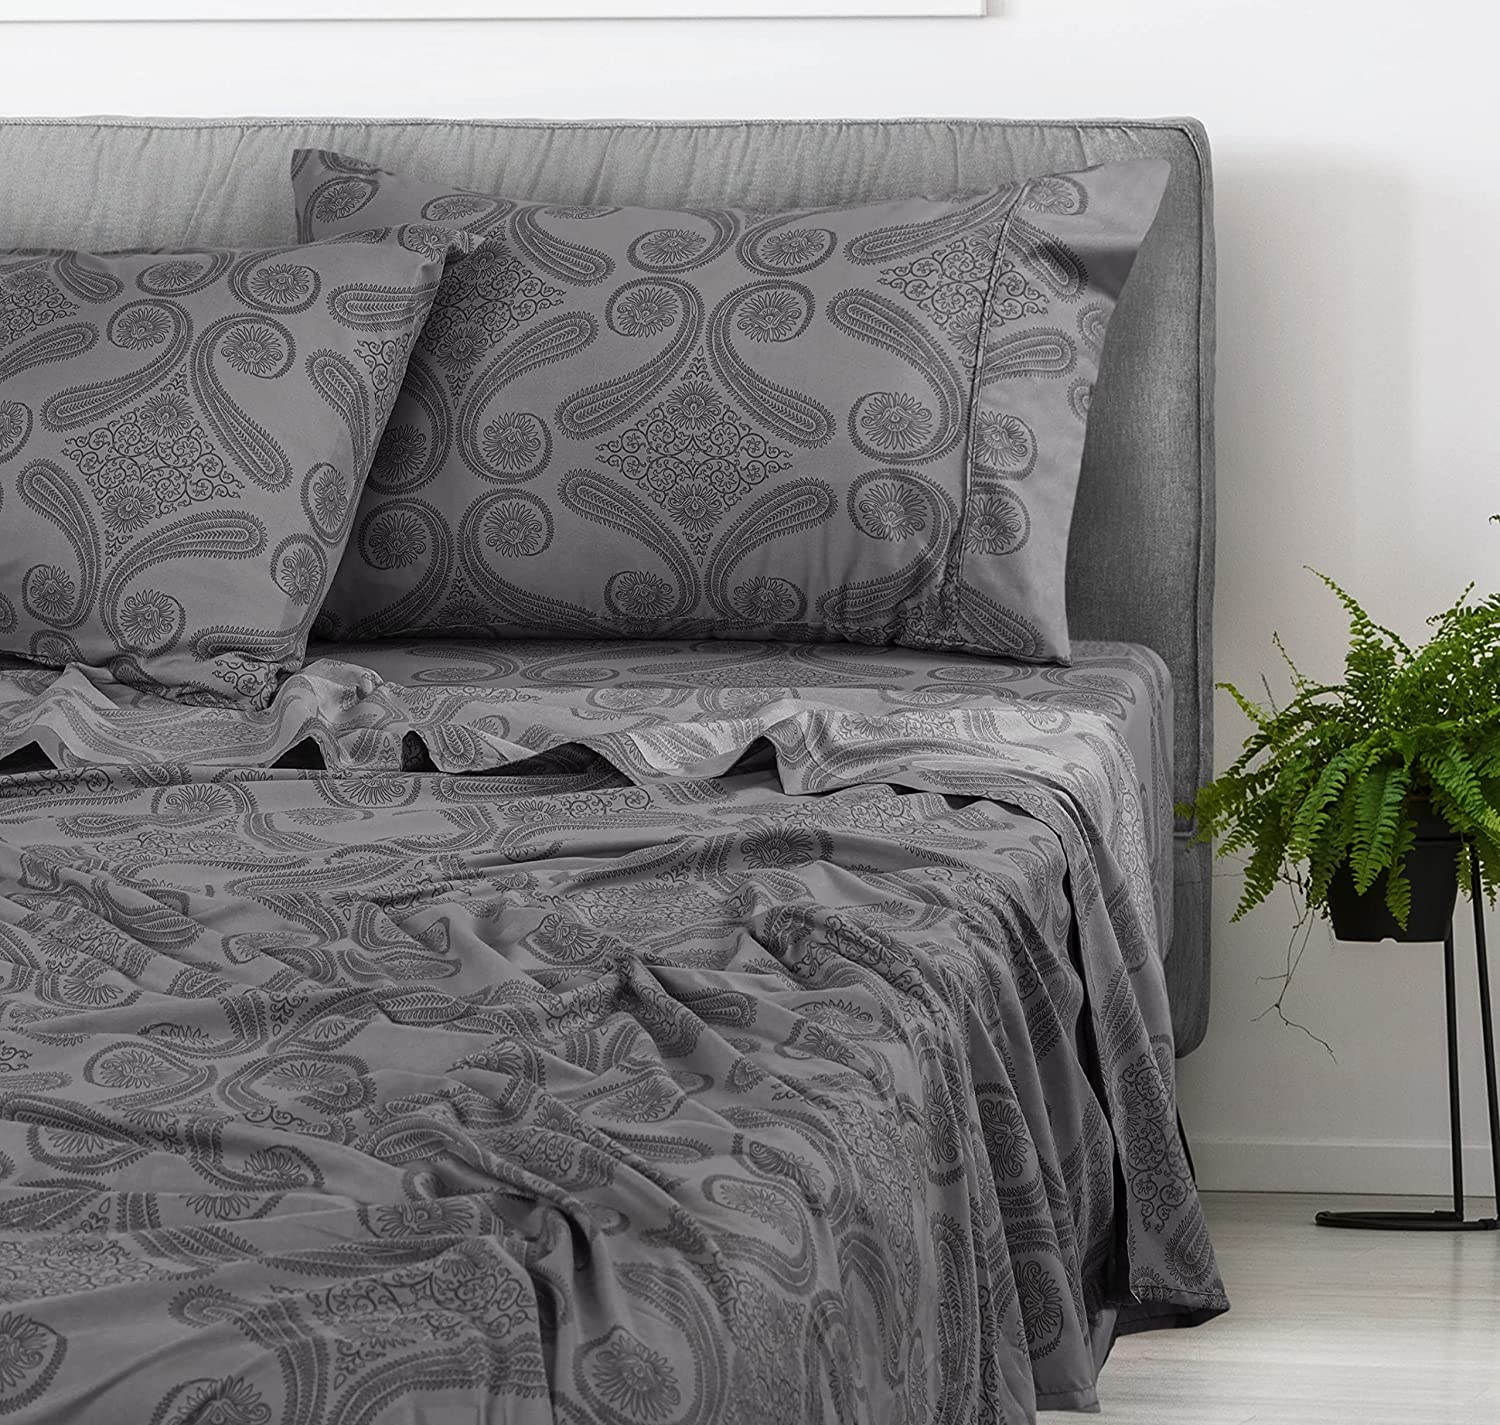 Mainstays Super Soft High Quality Brushed Microfiber Bed Sheet Set, Queen,  Grey Floral, 4 Piece 